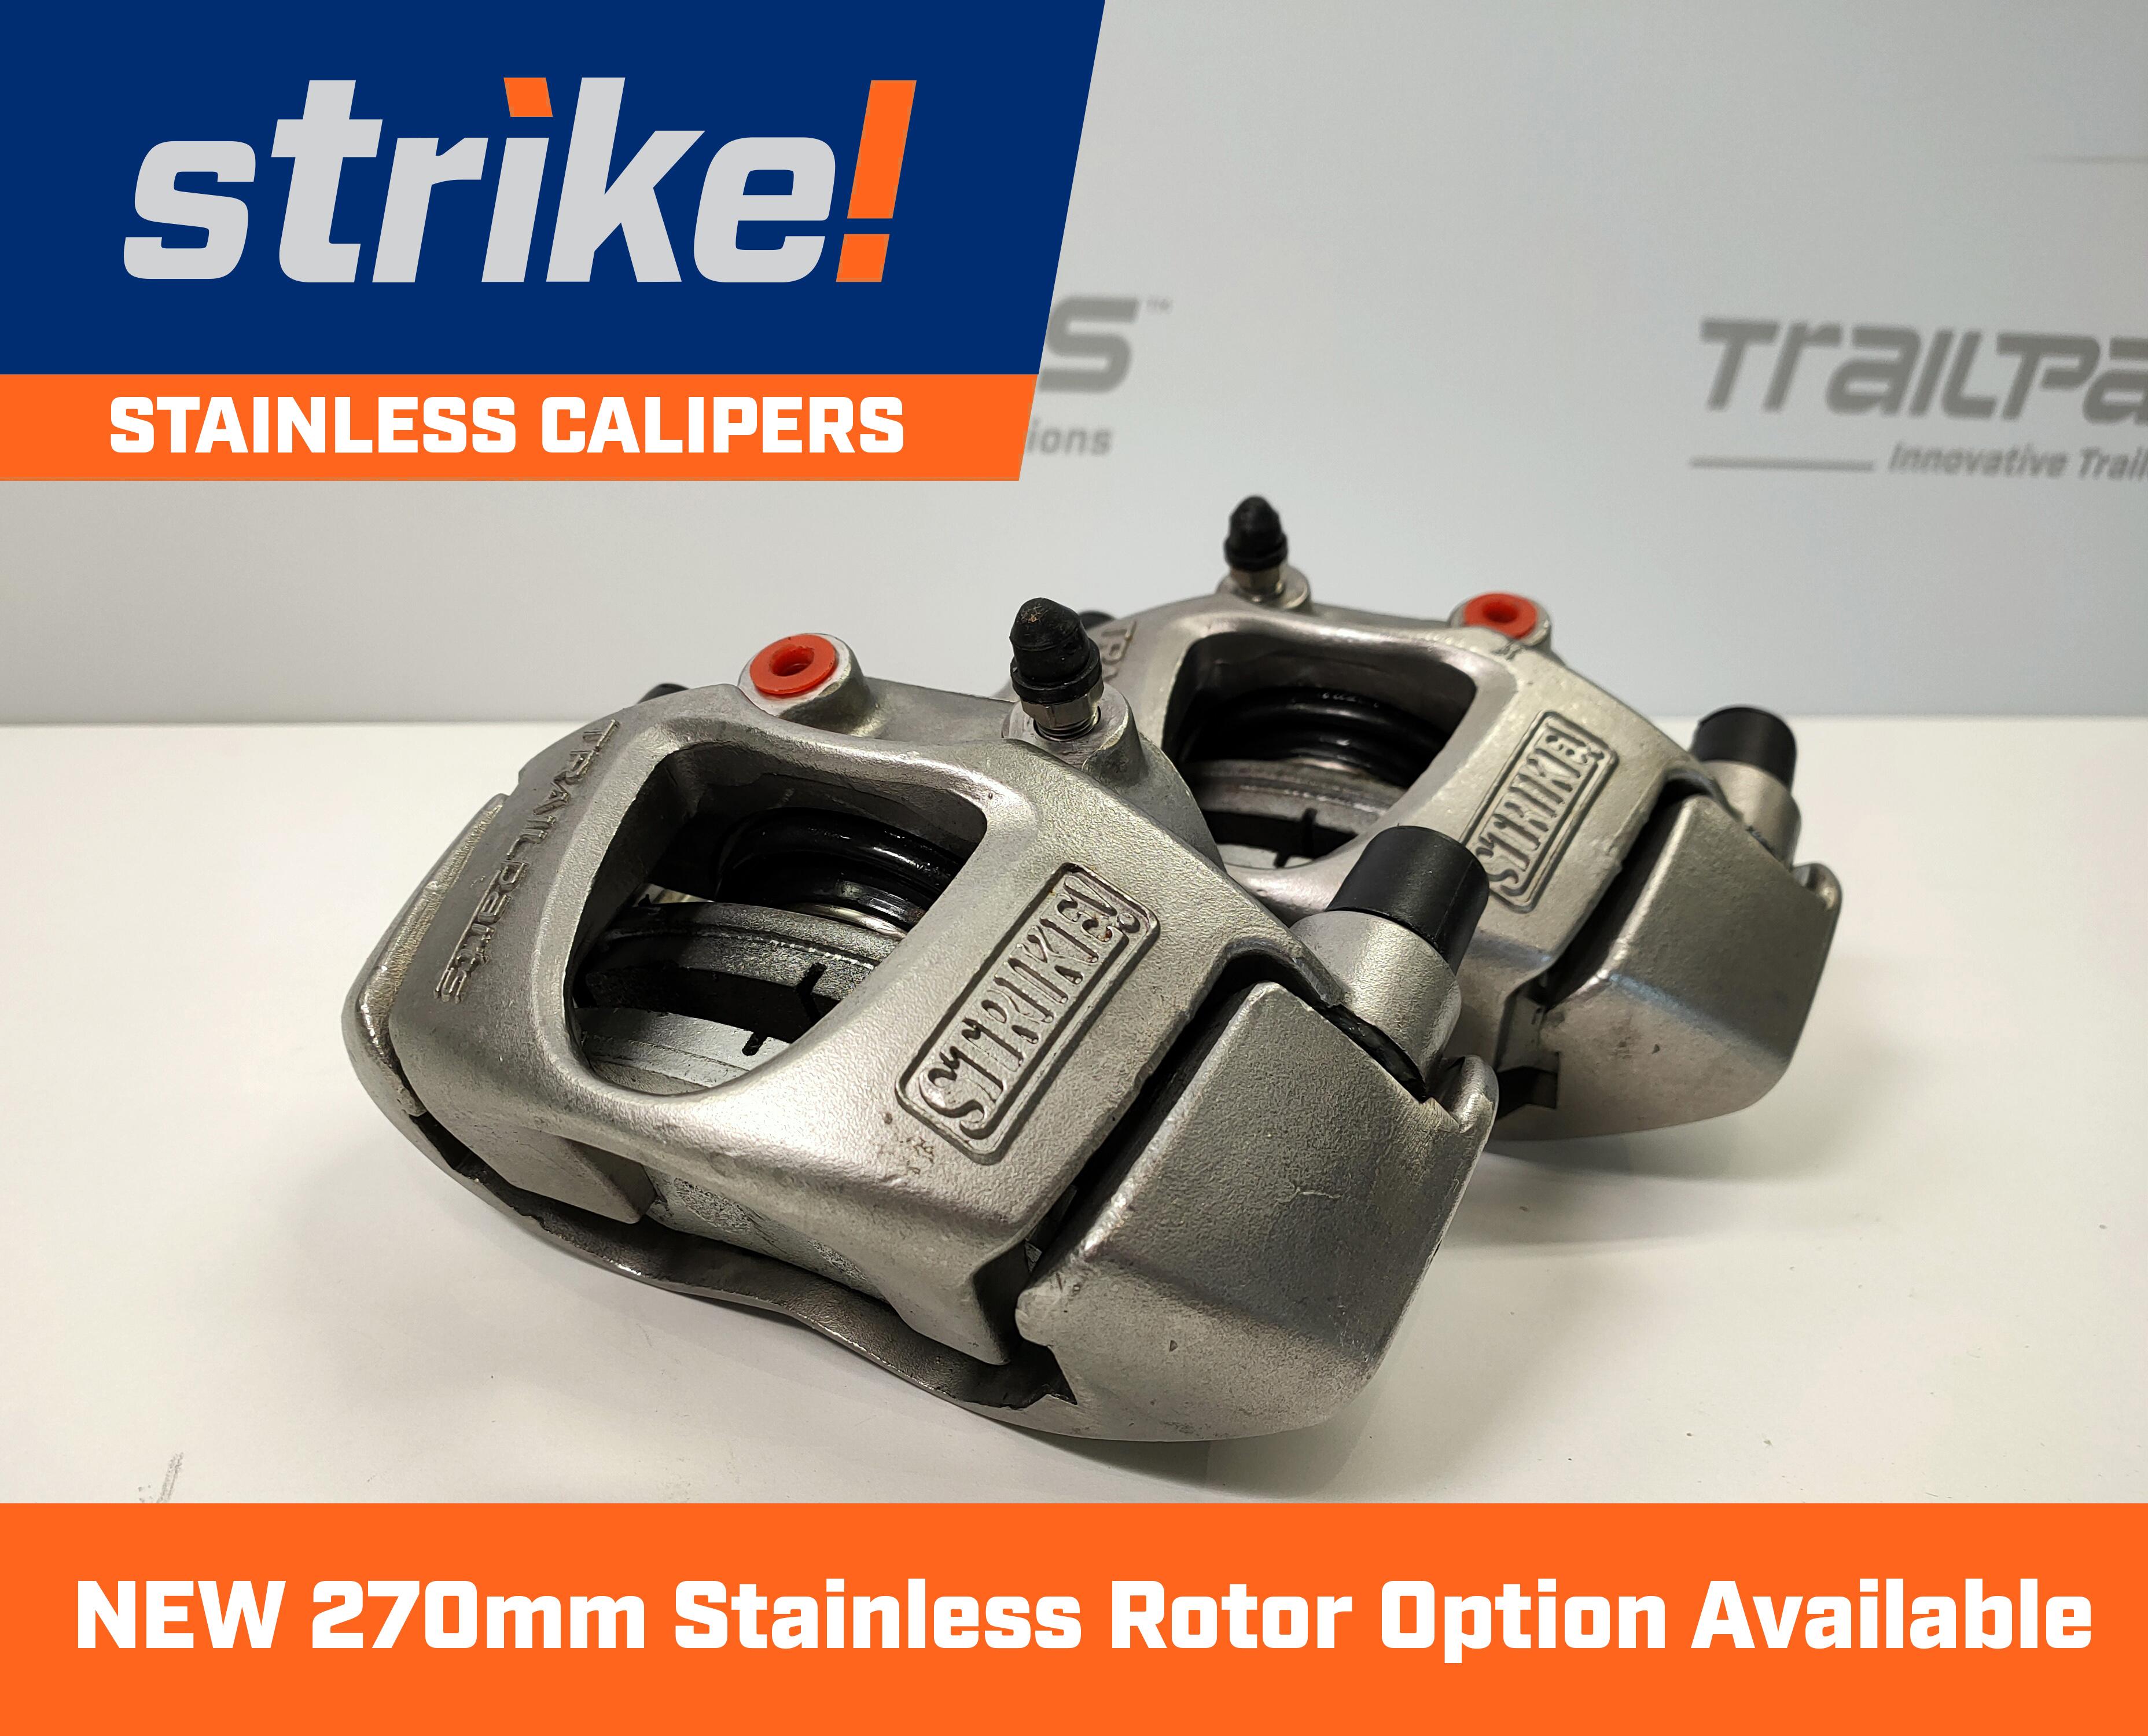 Strike! Stainless Calipers image